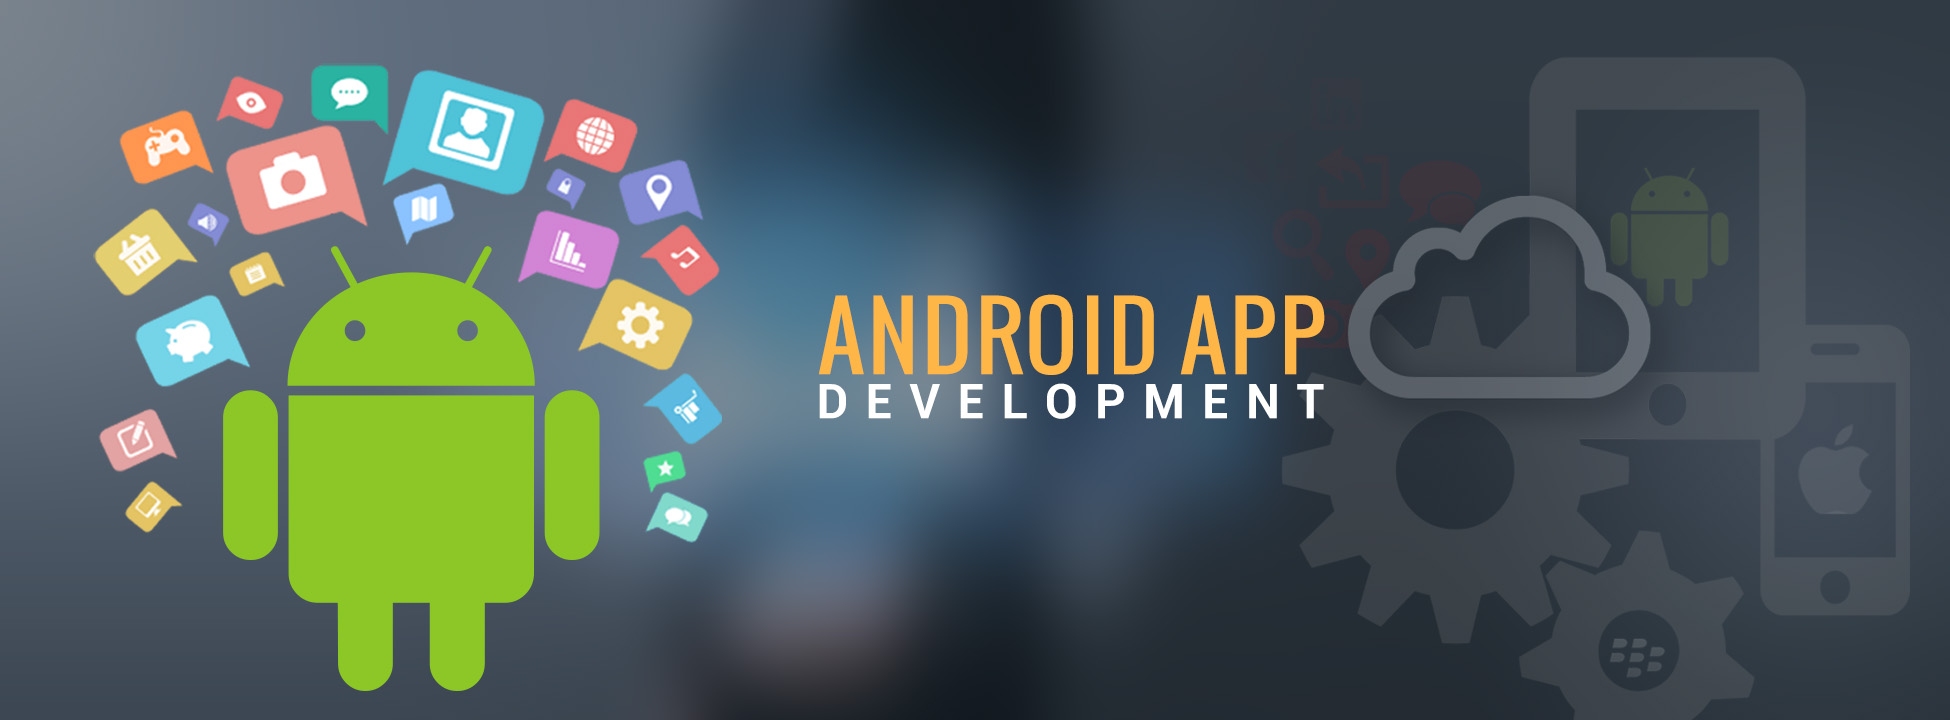 Why Android app development is important